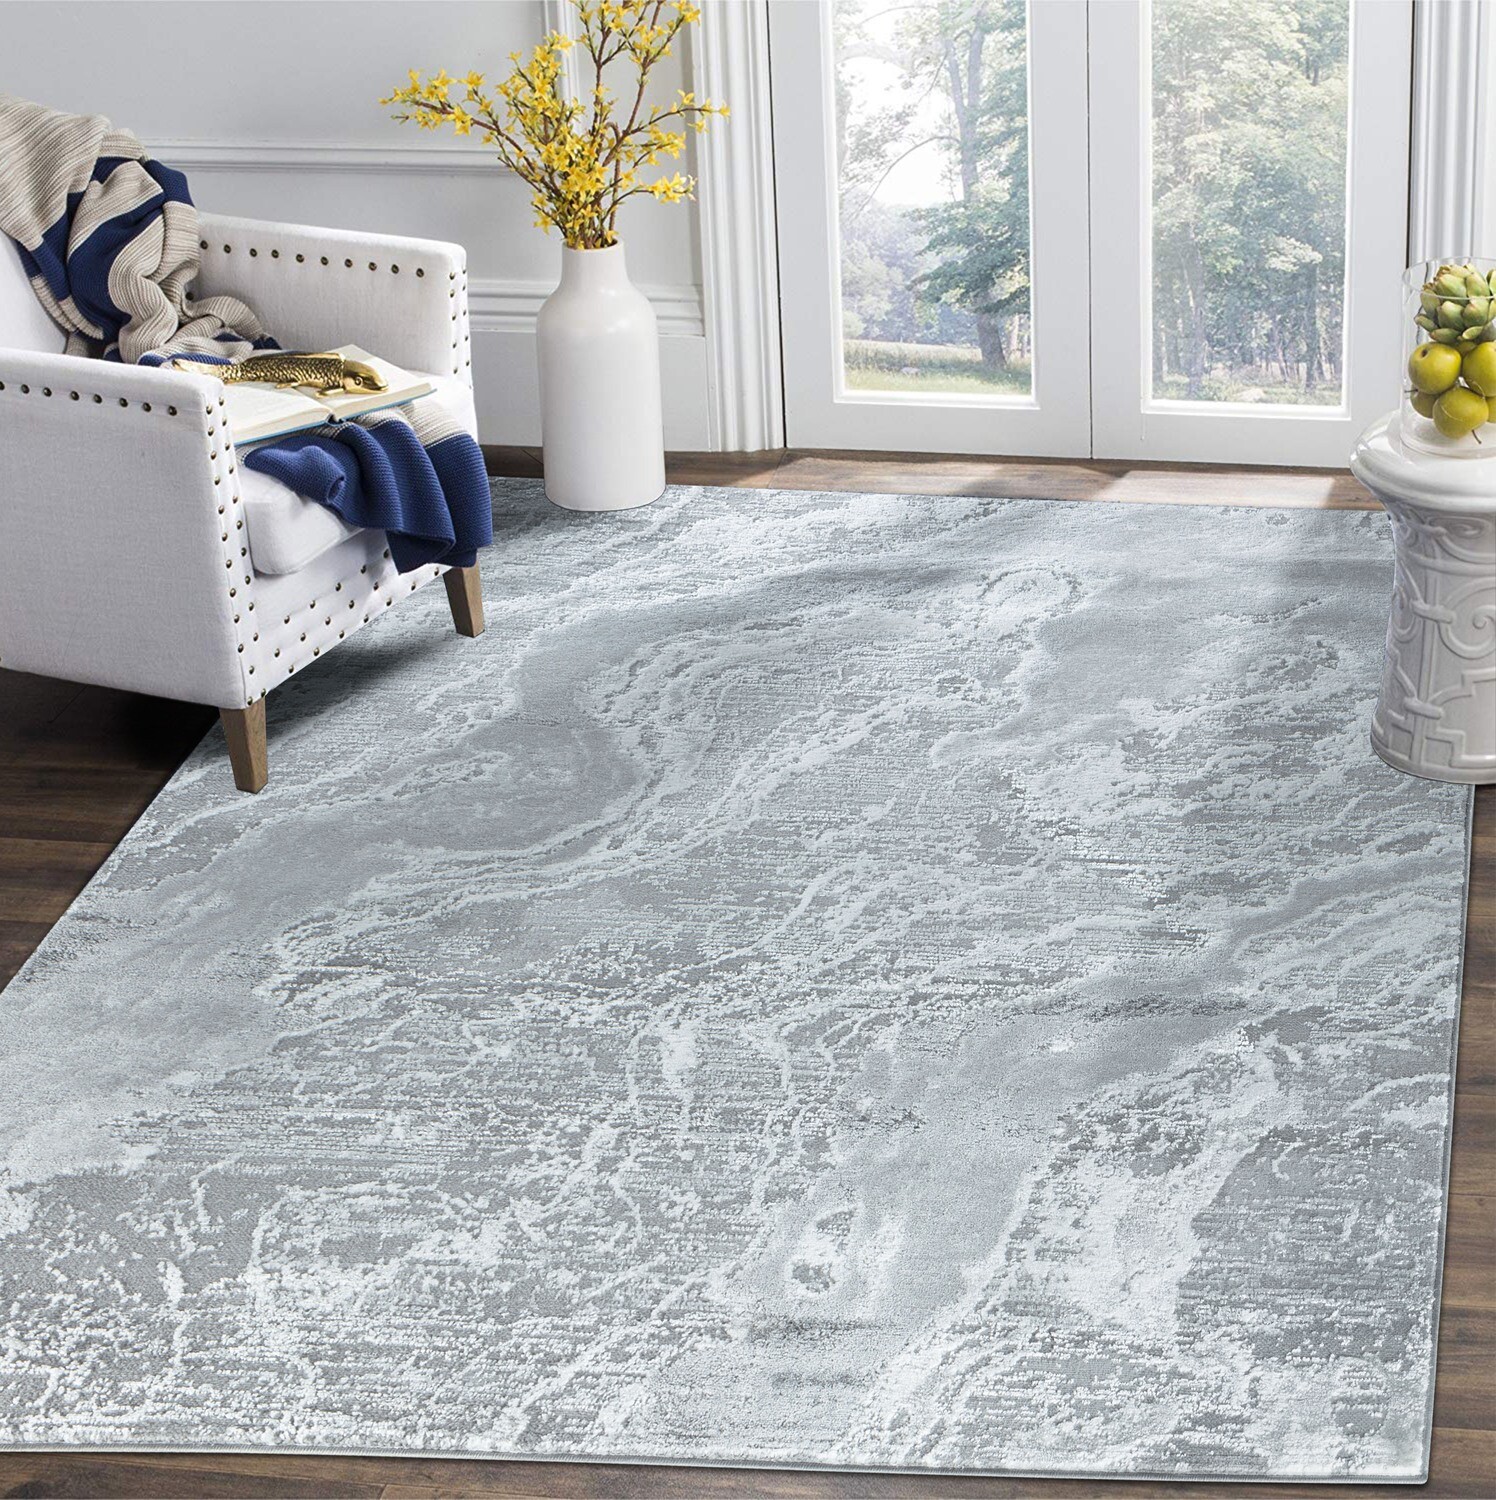 Glory Rugs Modern Abstract Area Rug Grey Rugs for Home Office Bedroom and Living Room